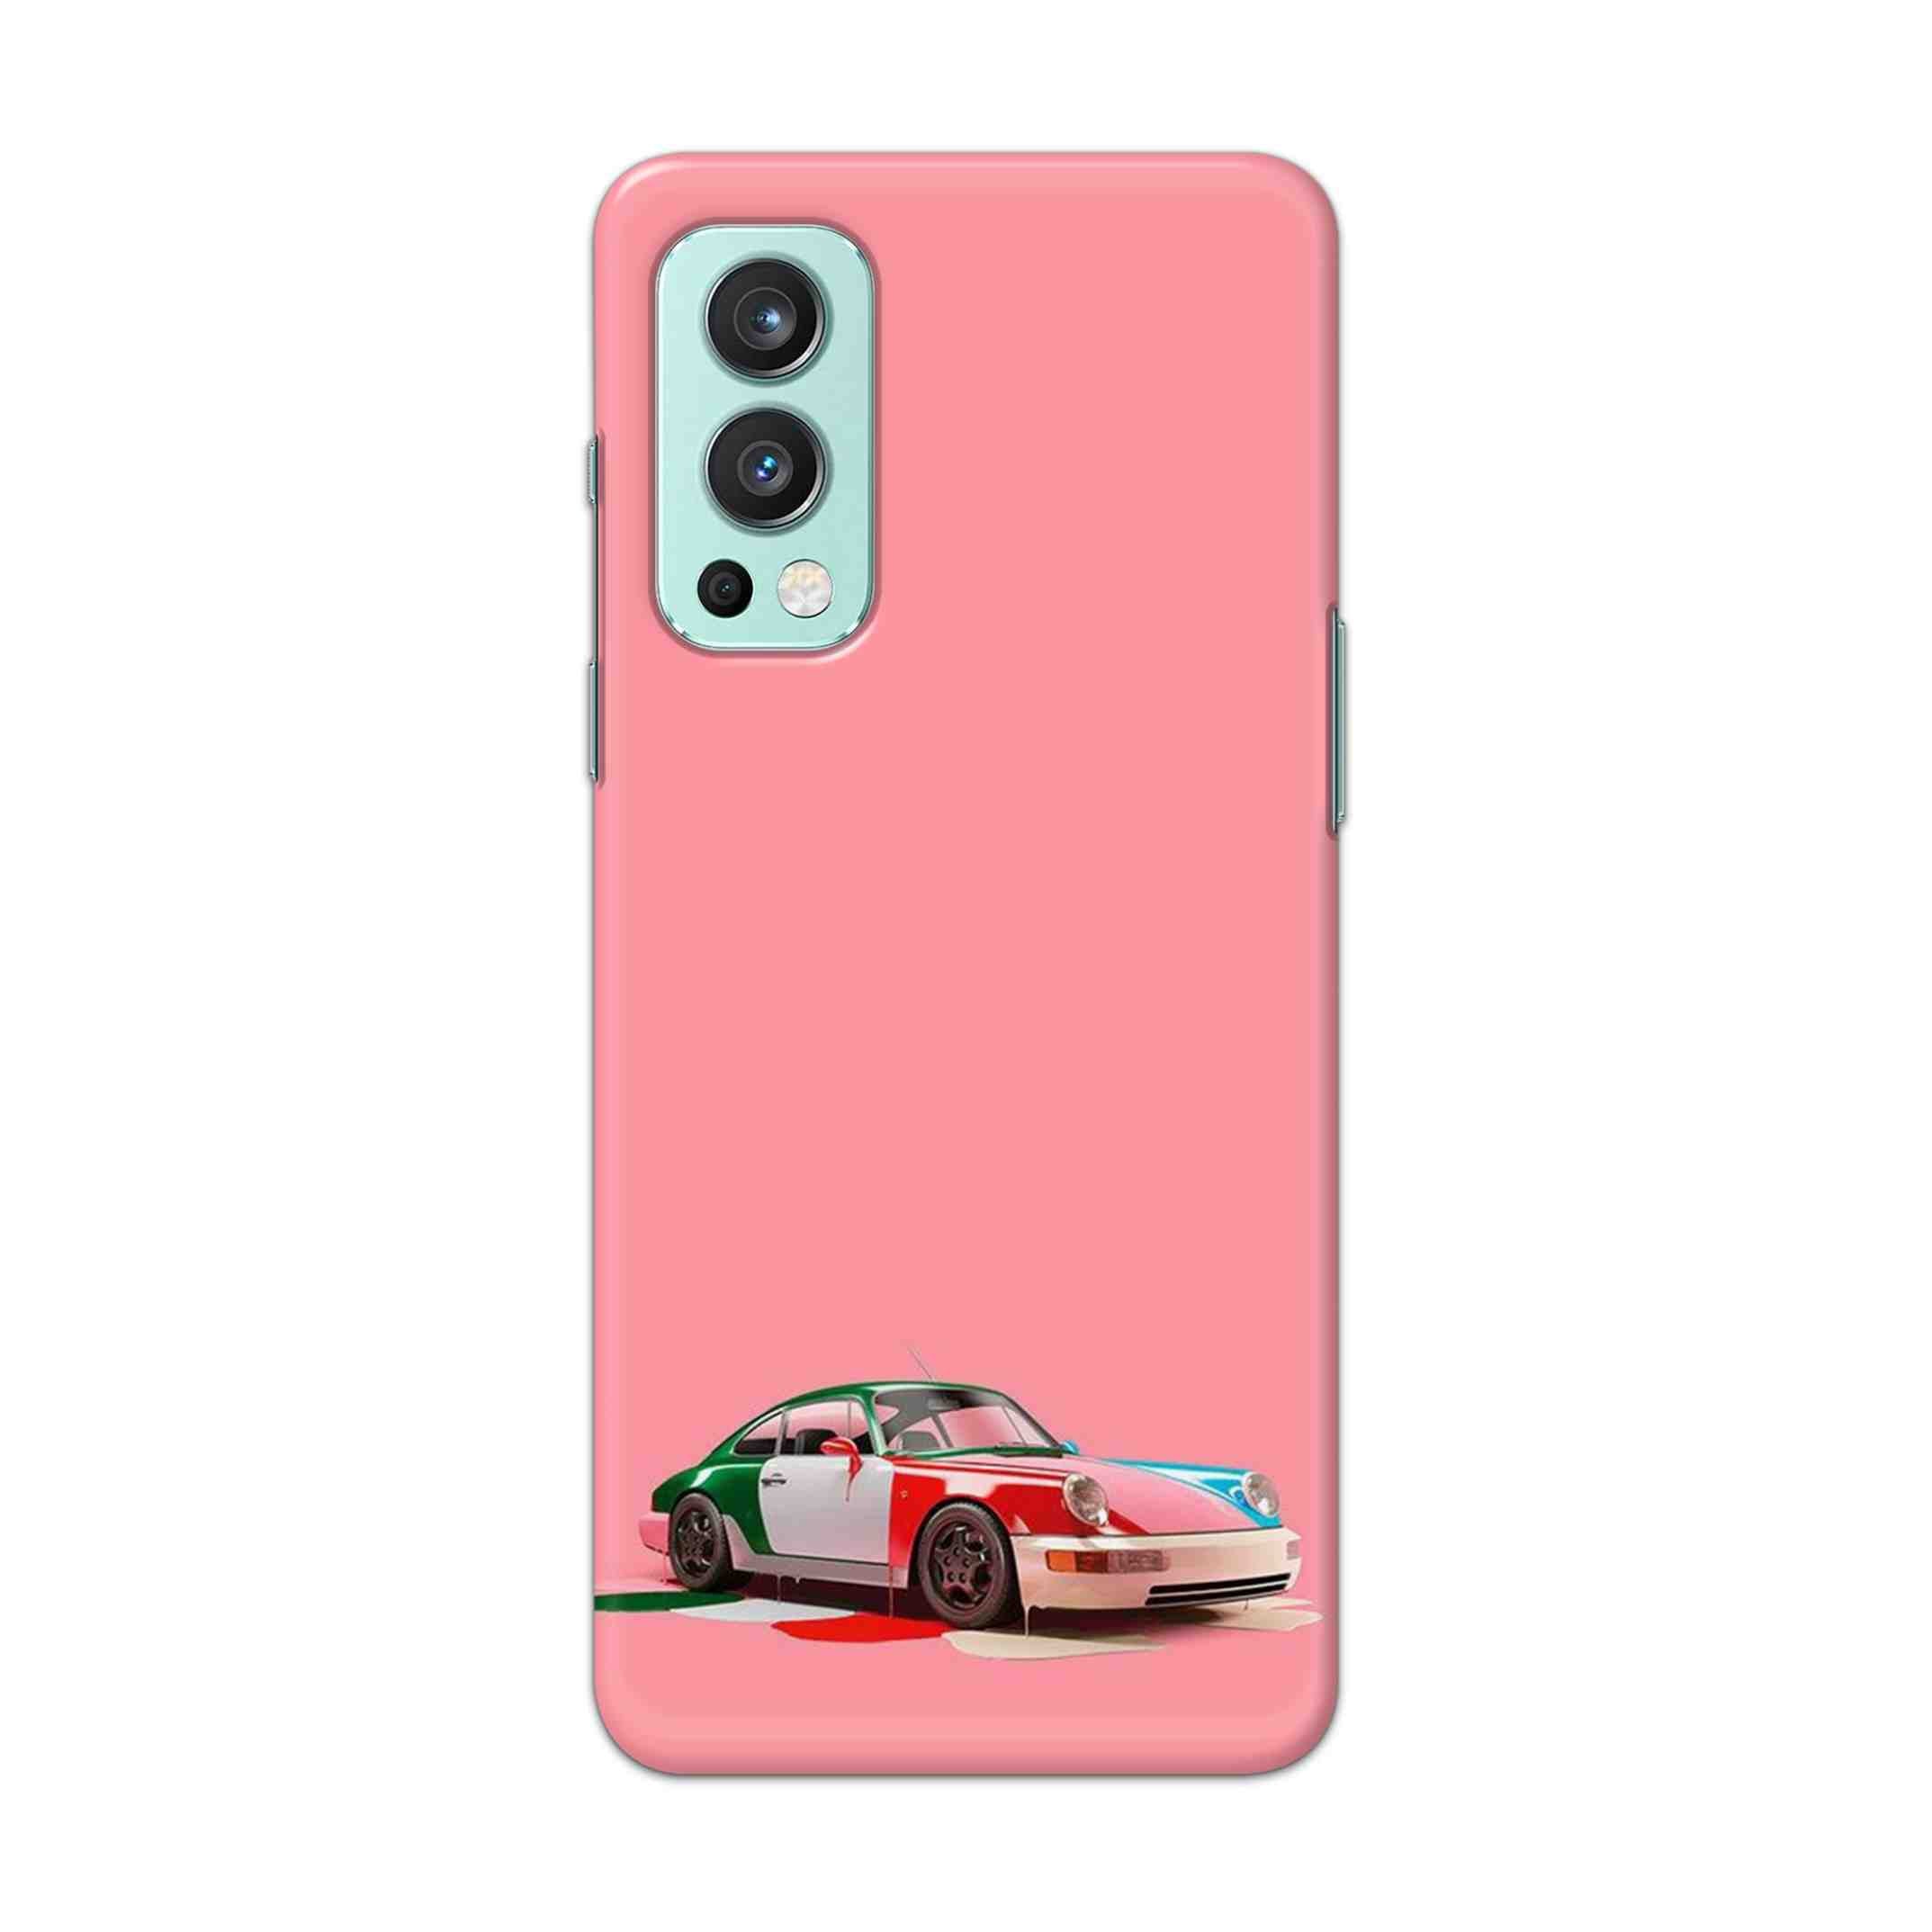 Buy Pink Porche Hard Back Mobile Phone Case Cover For OnePlus Nord 2 5G Online